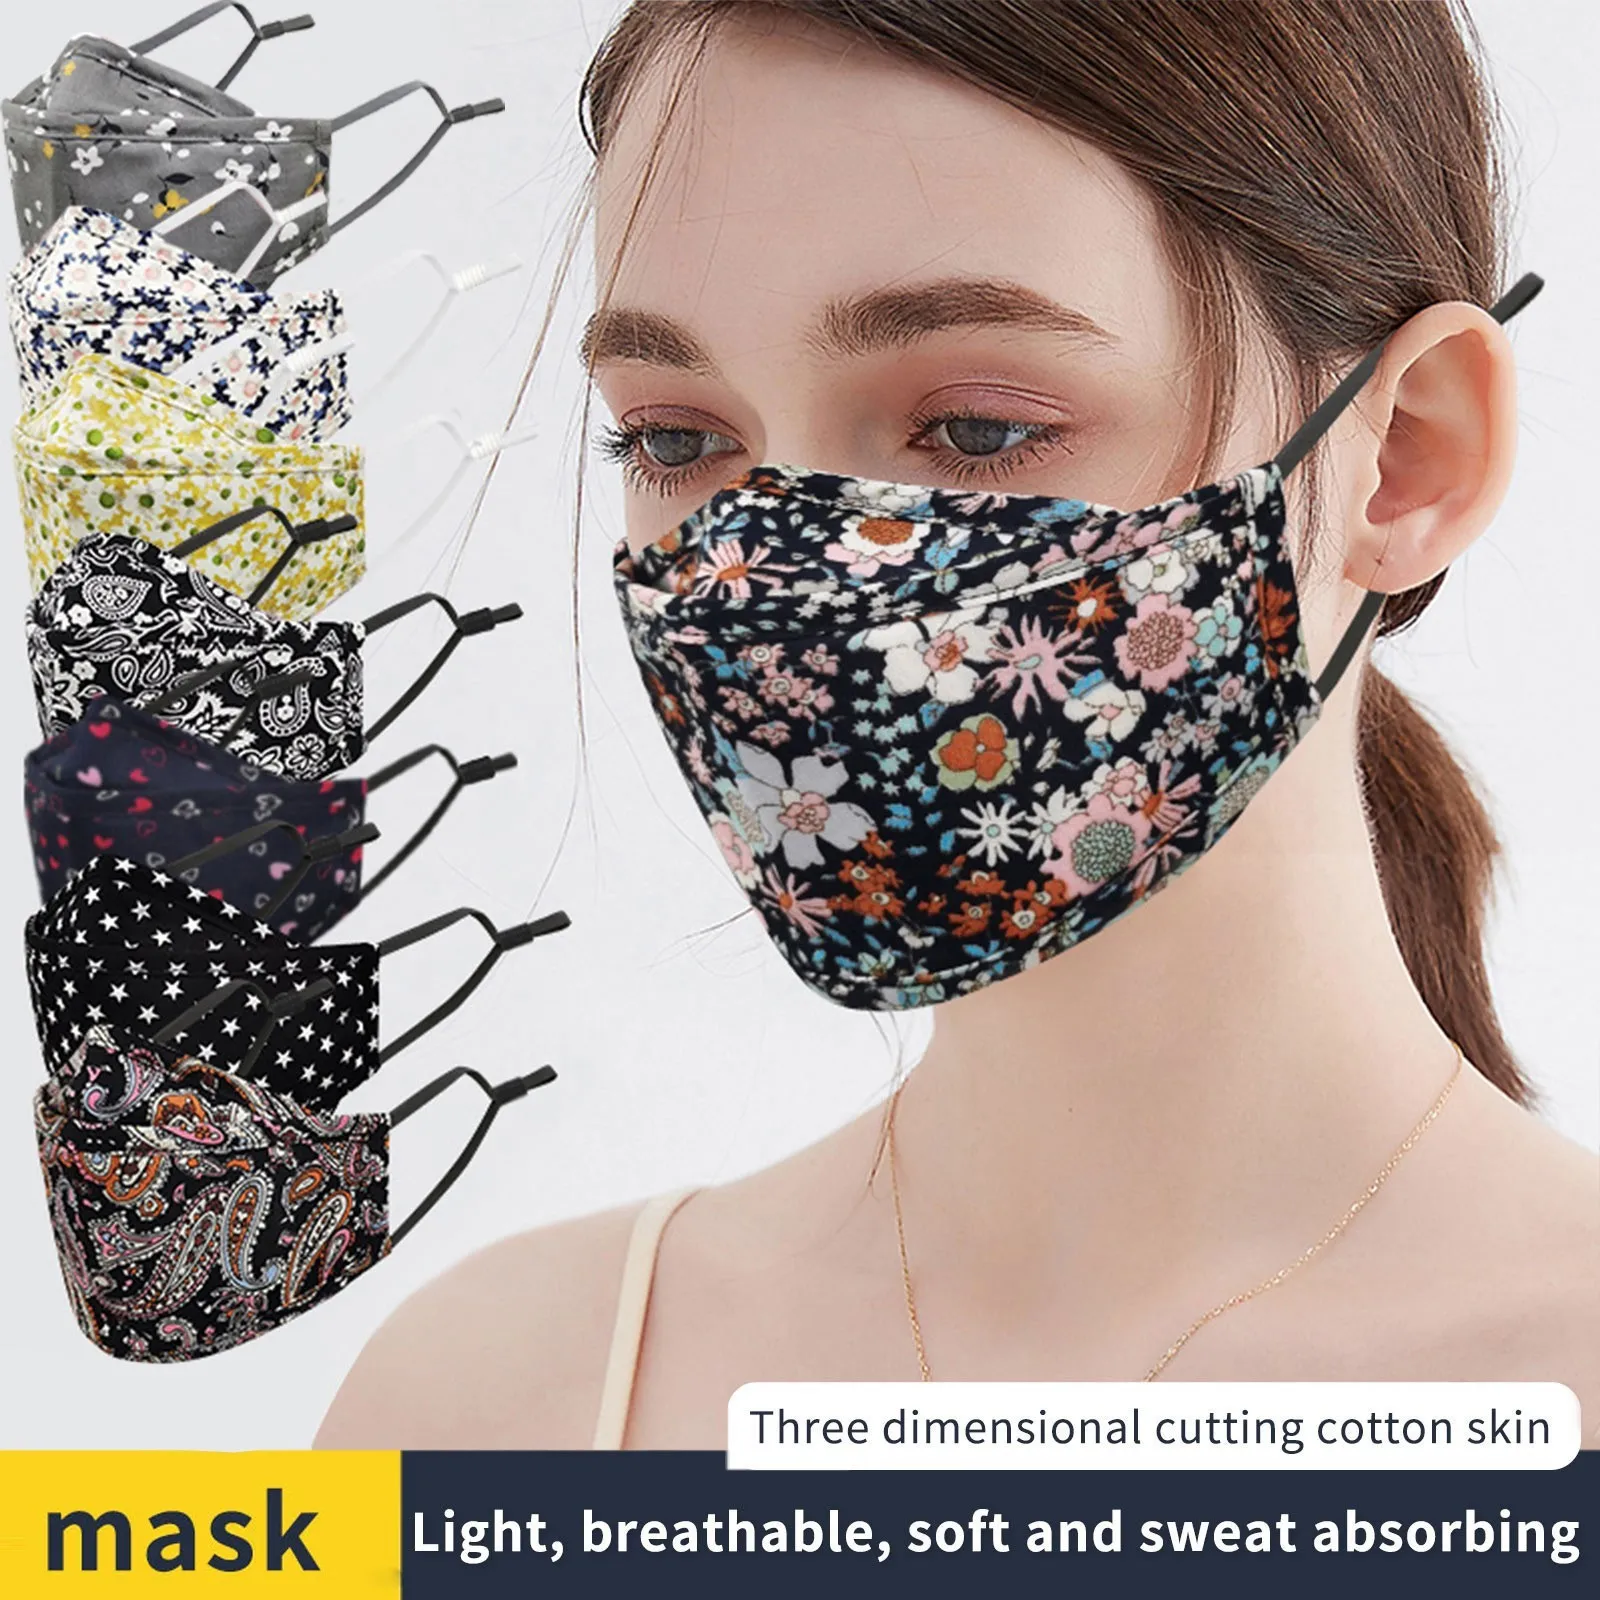 Christmas Unisex Cotton Facial Mask Floral Reusable Face Warm Windproof Fish Type Masks Halloween Mask Cosplay Маска Для Лица funny halloween costumes